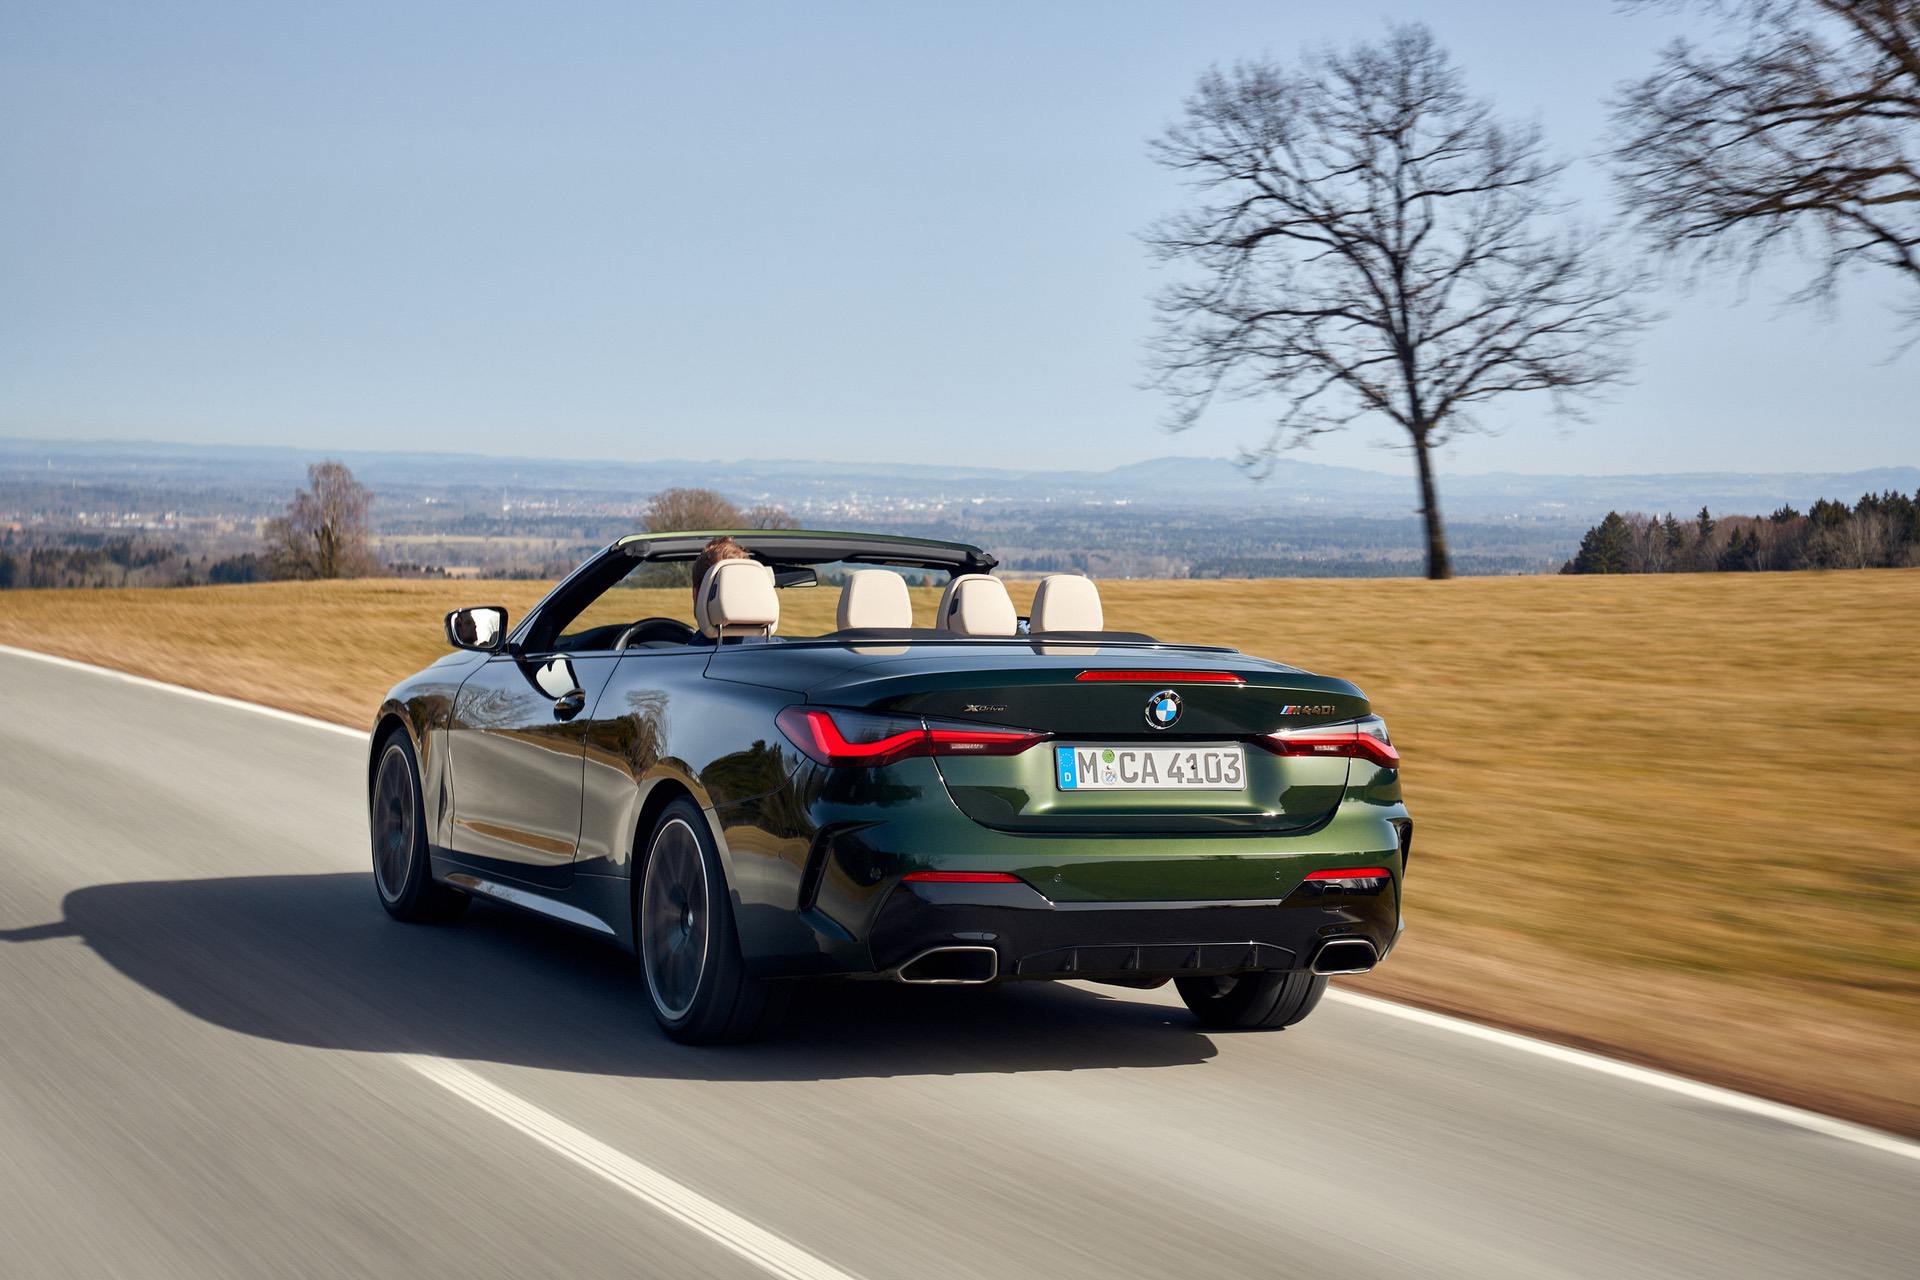 FIRST DRIVE: 2021 BMW M440i xDrive Convertible – A Winning Formula For Open Top Driving